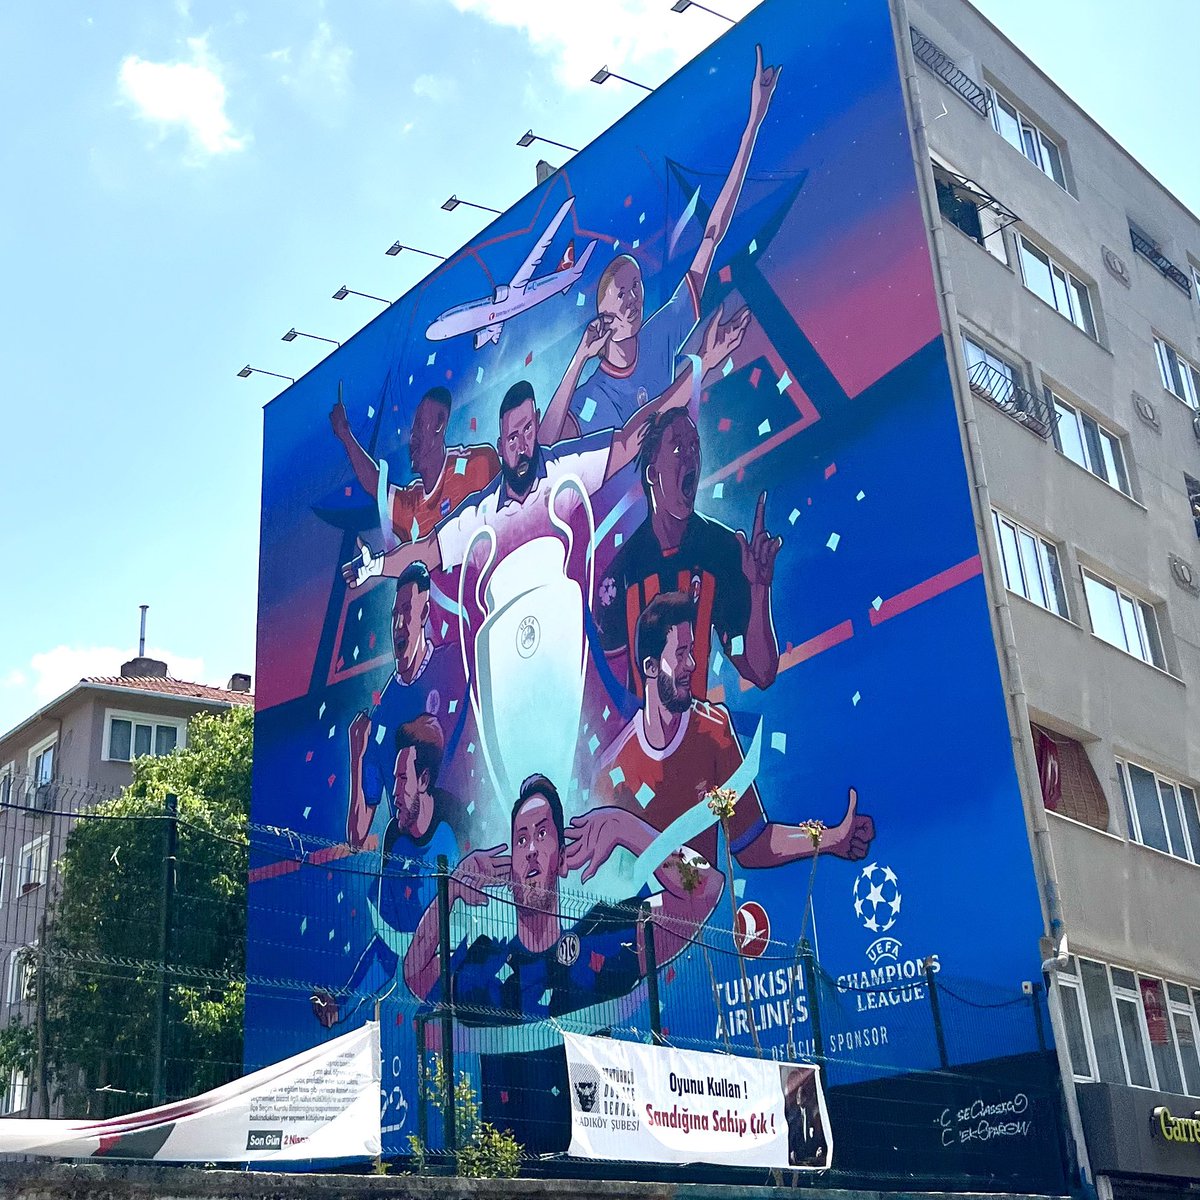 My “Road to #ChampionsLeagueFinal Istanbul 23” illustration is adapted to a mural in Kadıköy, İstanbul